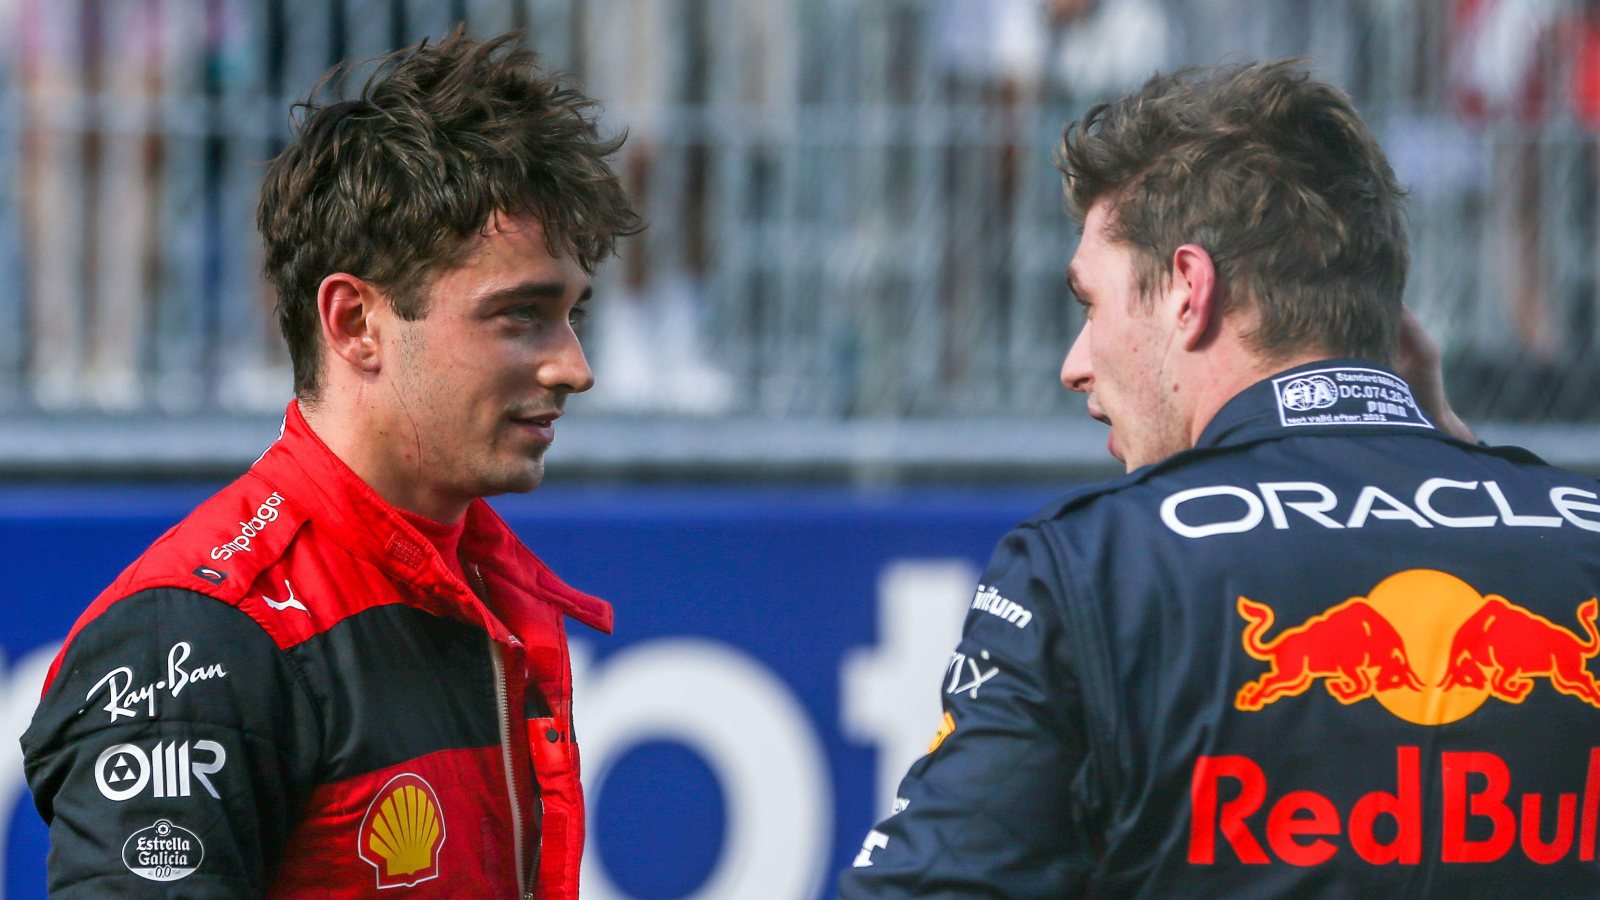 Charles Leclerc and Max Verstappen talking to each other. Miami, May 2022.